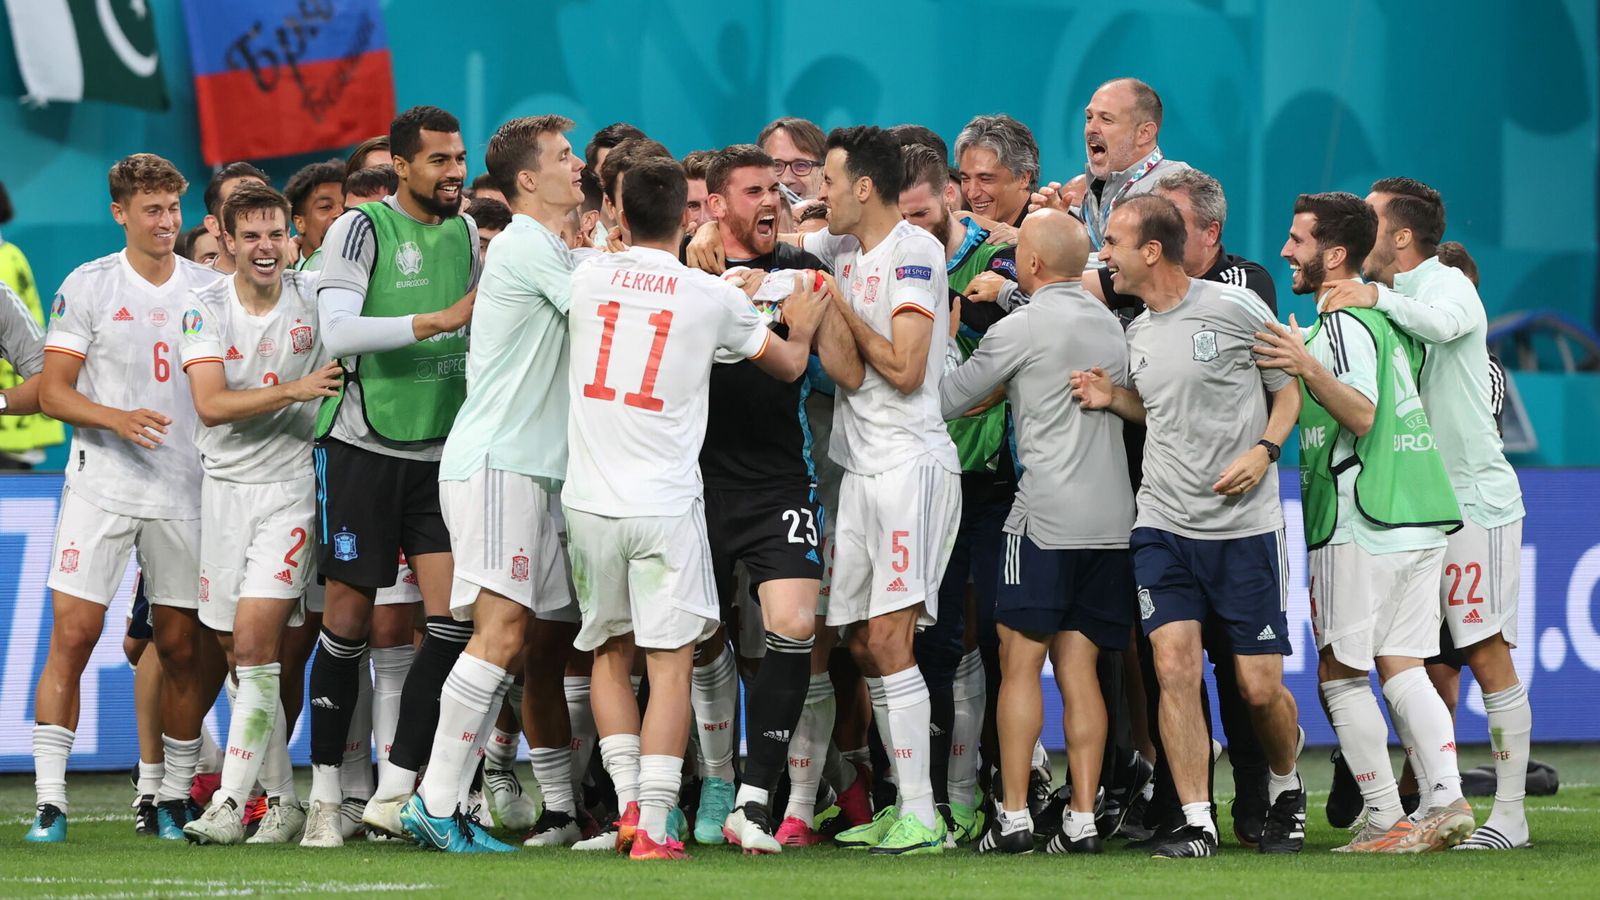 St.petersburg (Russian Federation), 02 07 2021.- Players of Spain react after winning the UEFA EURO 2020 quarter final match between Switzerland and Spain in St.Petersburg, Russia, 02 July 2021. (Rusia, España, Suiza) EFE EPA Alexander Hassenstein   POOL (RESTRICTIONS: For editorial news reporting purposes only. Images must appear as still images and must not emulate match action video footage. Photographs published in online publications shall have an interval of at least 20 seconds between the posting.)